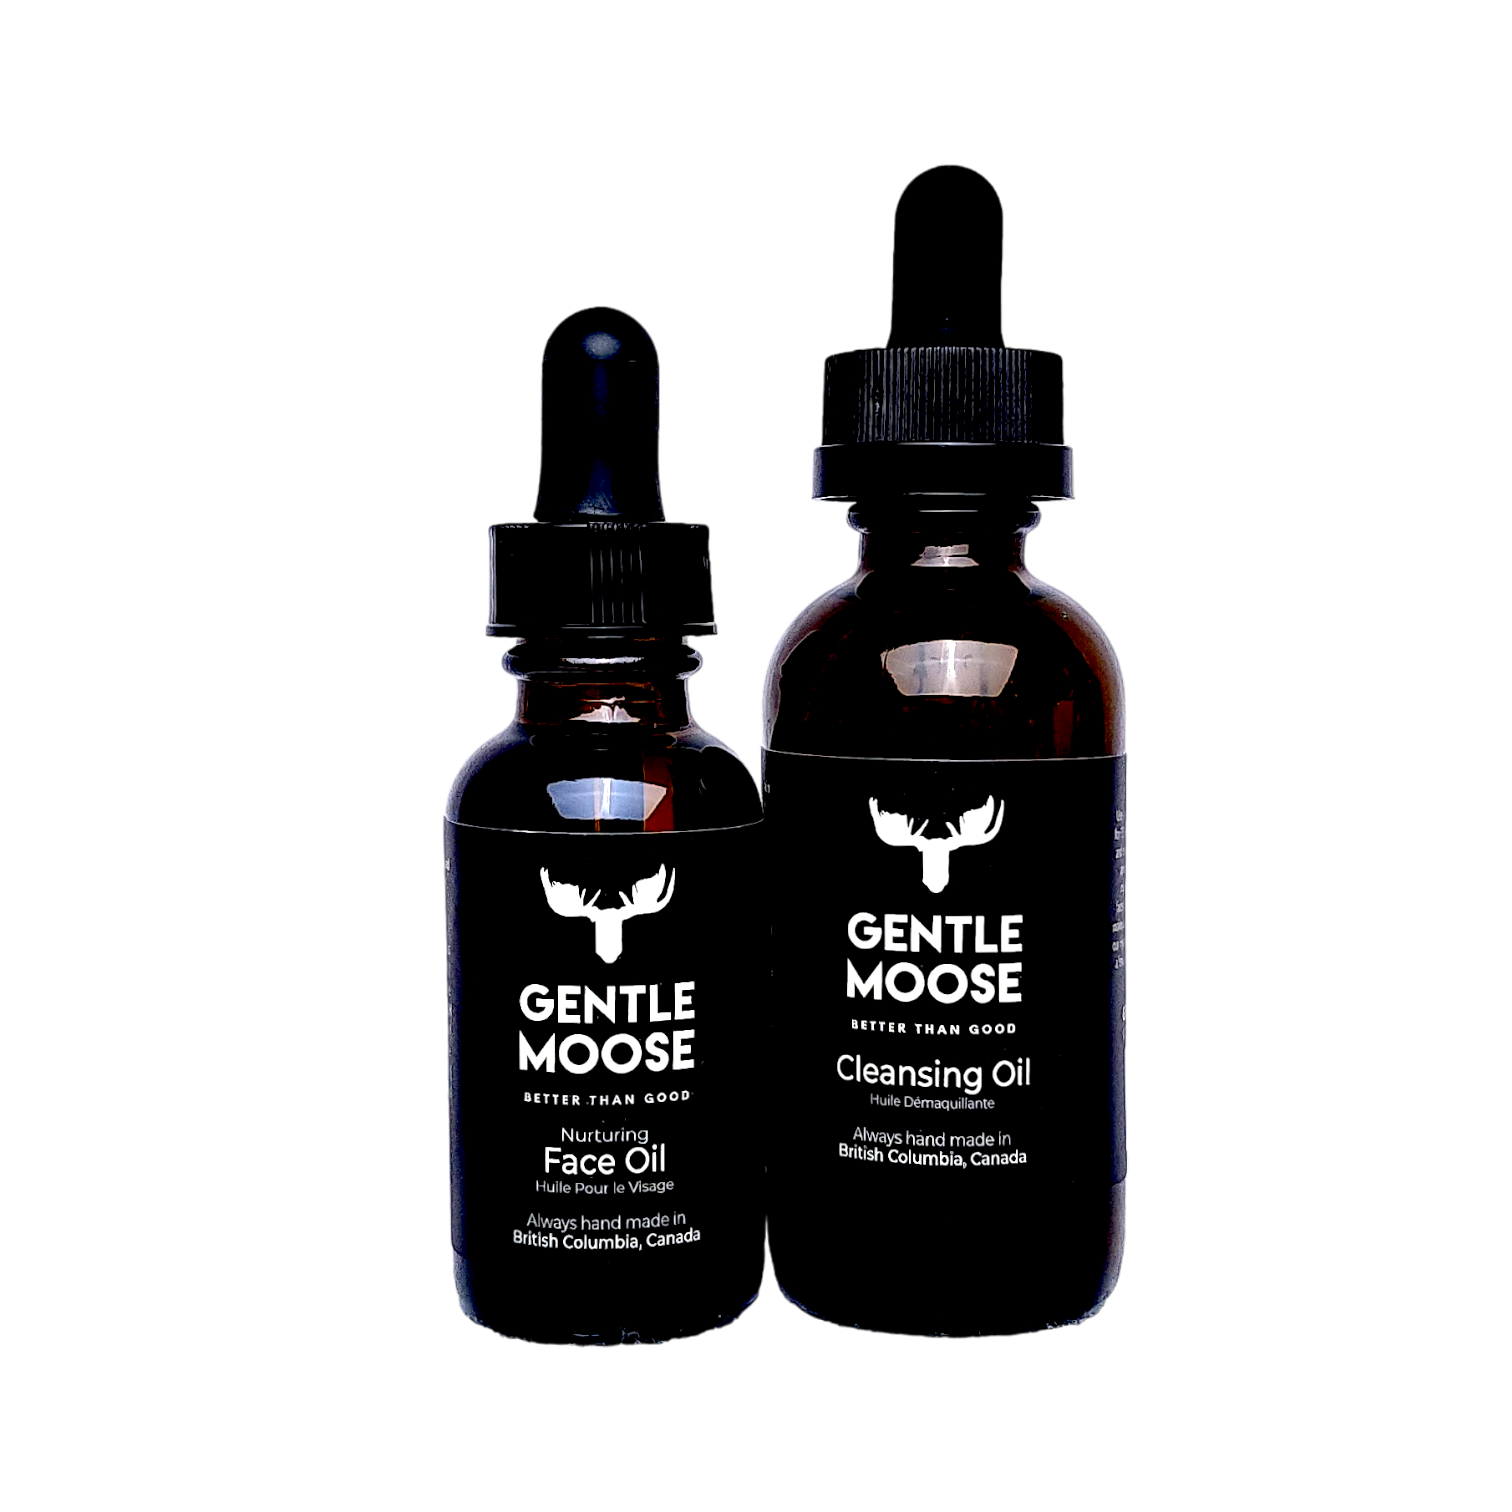 Gentle Moose Skincare Natural Face Oil and Cleansing Oil made in canada